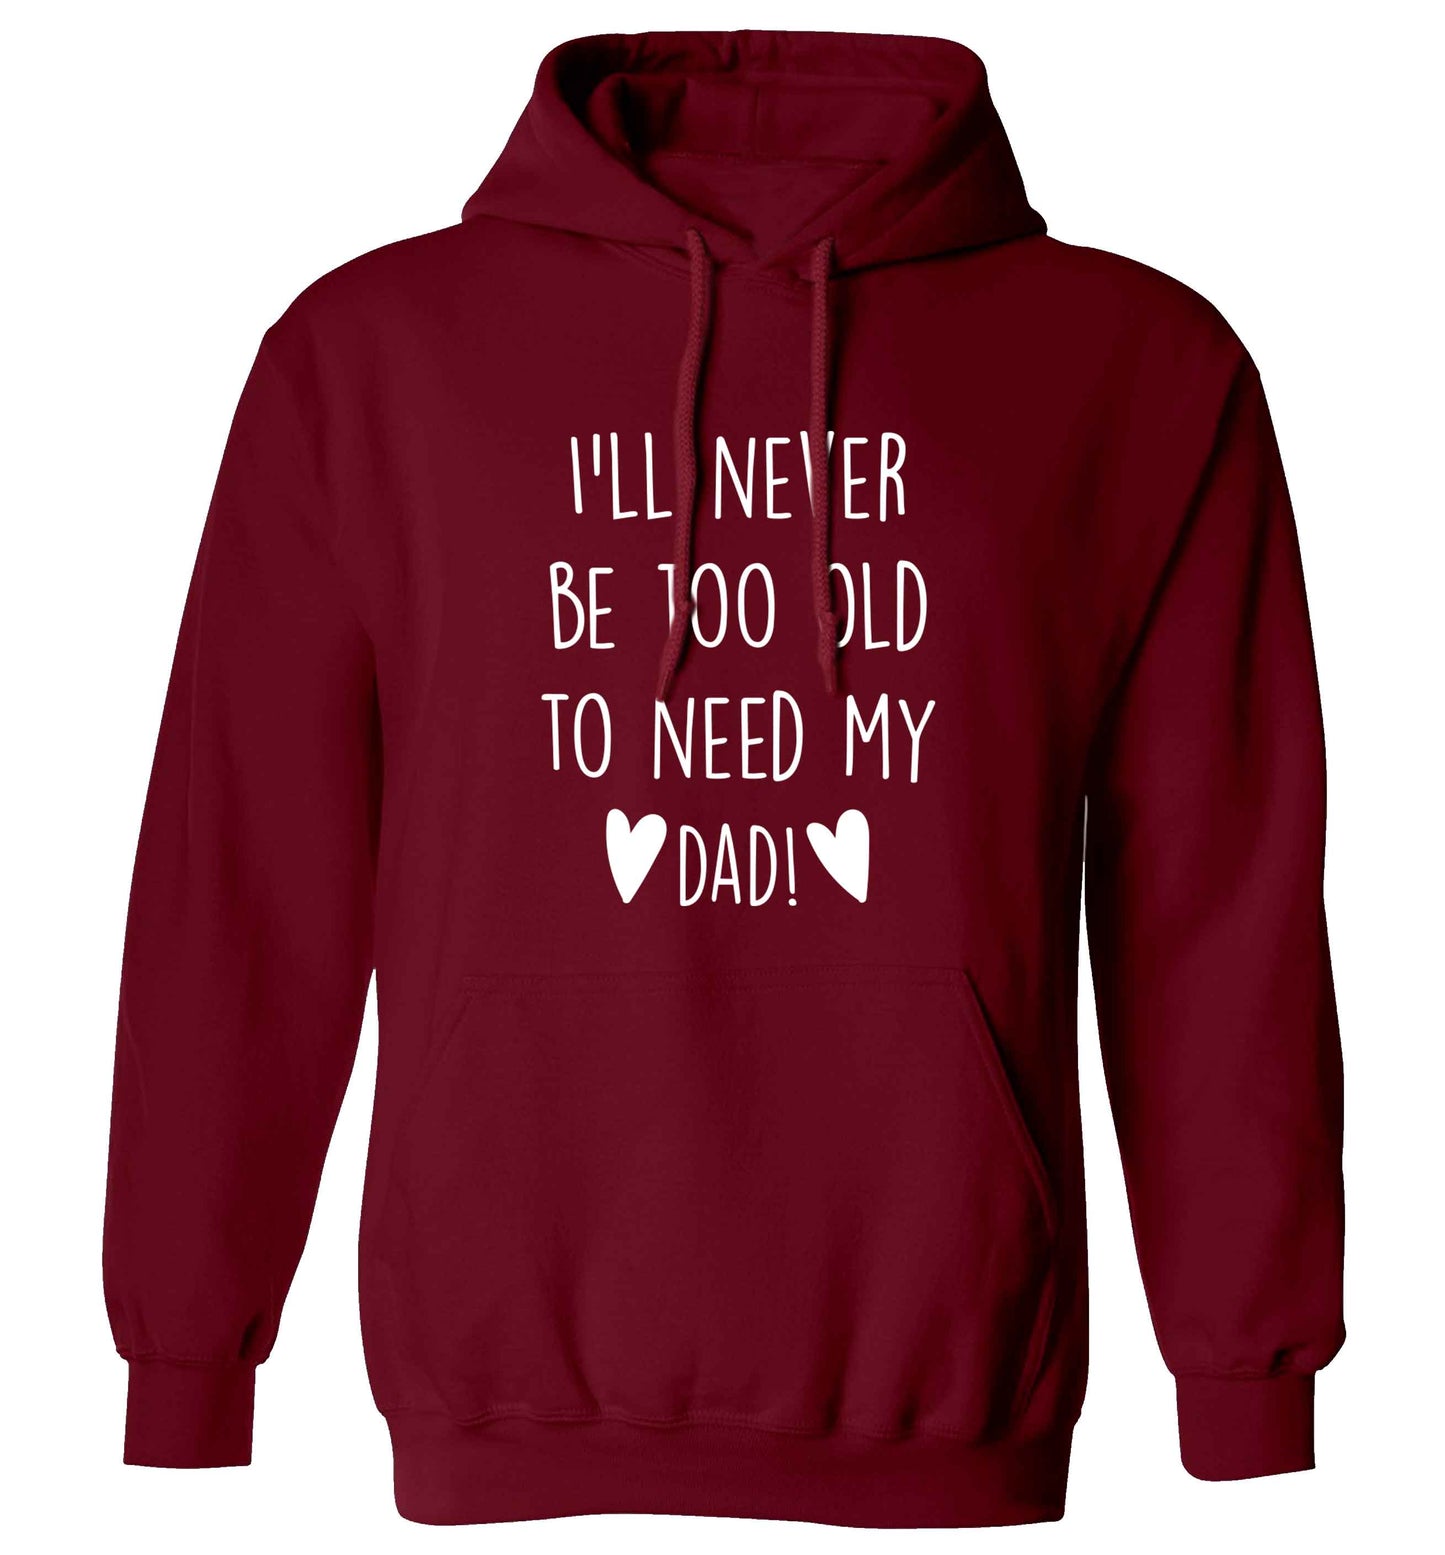 I'll never be too old to need my dad adults unisex maroon hoodie 2XL